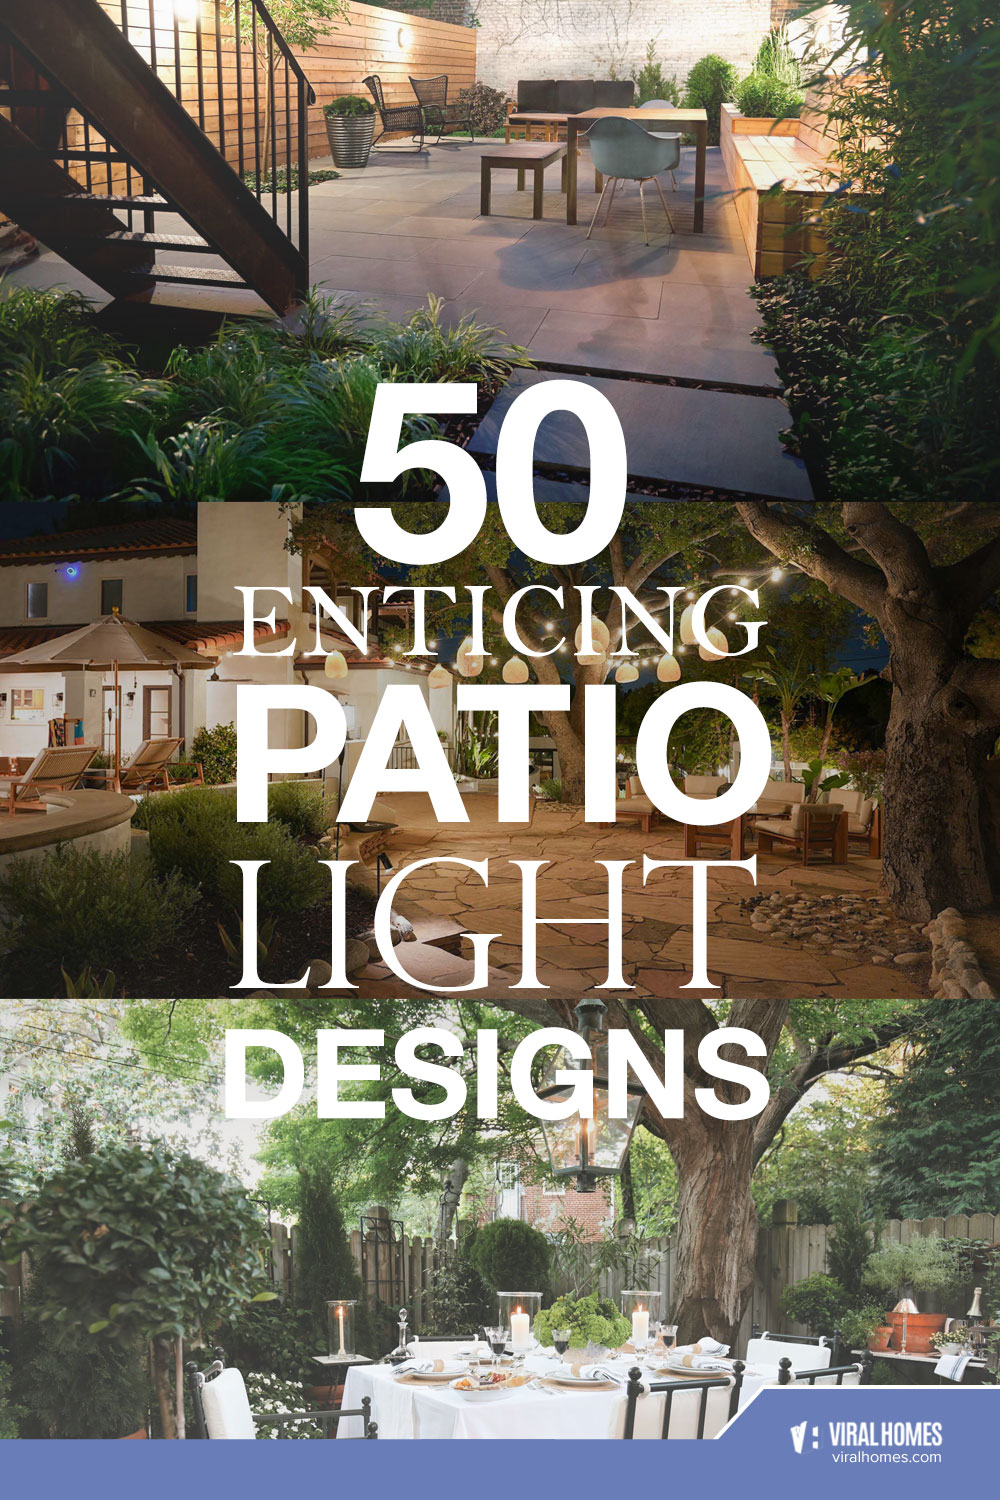 Enticing Patio Light Designs For Safety and Aesthetics